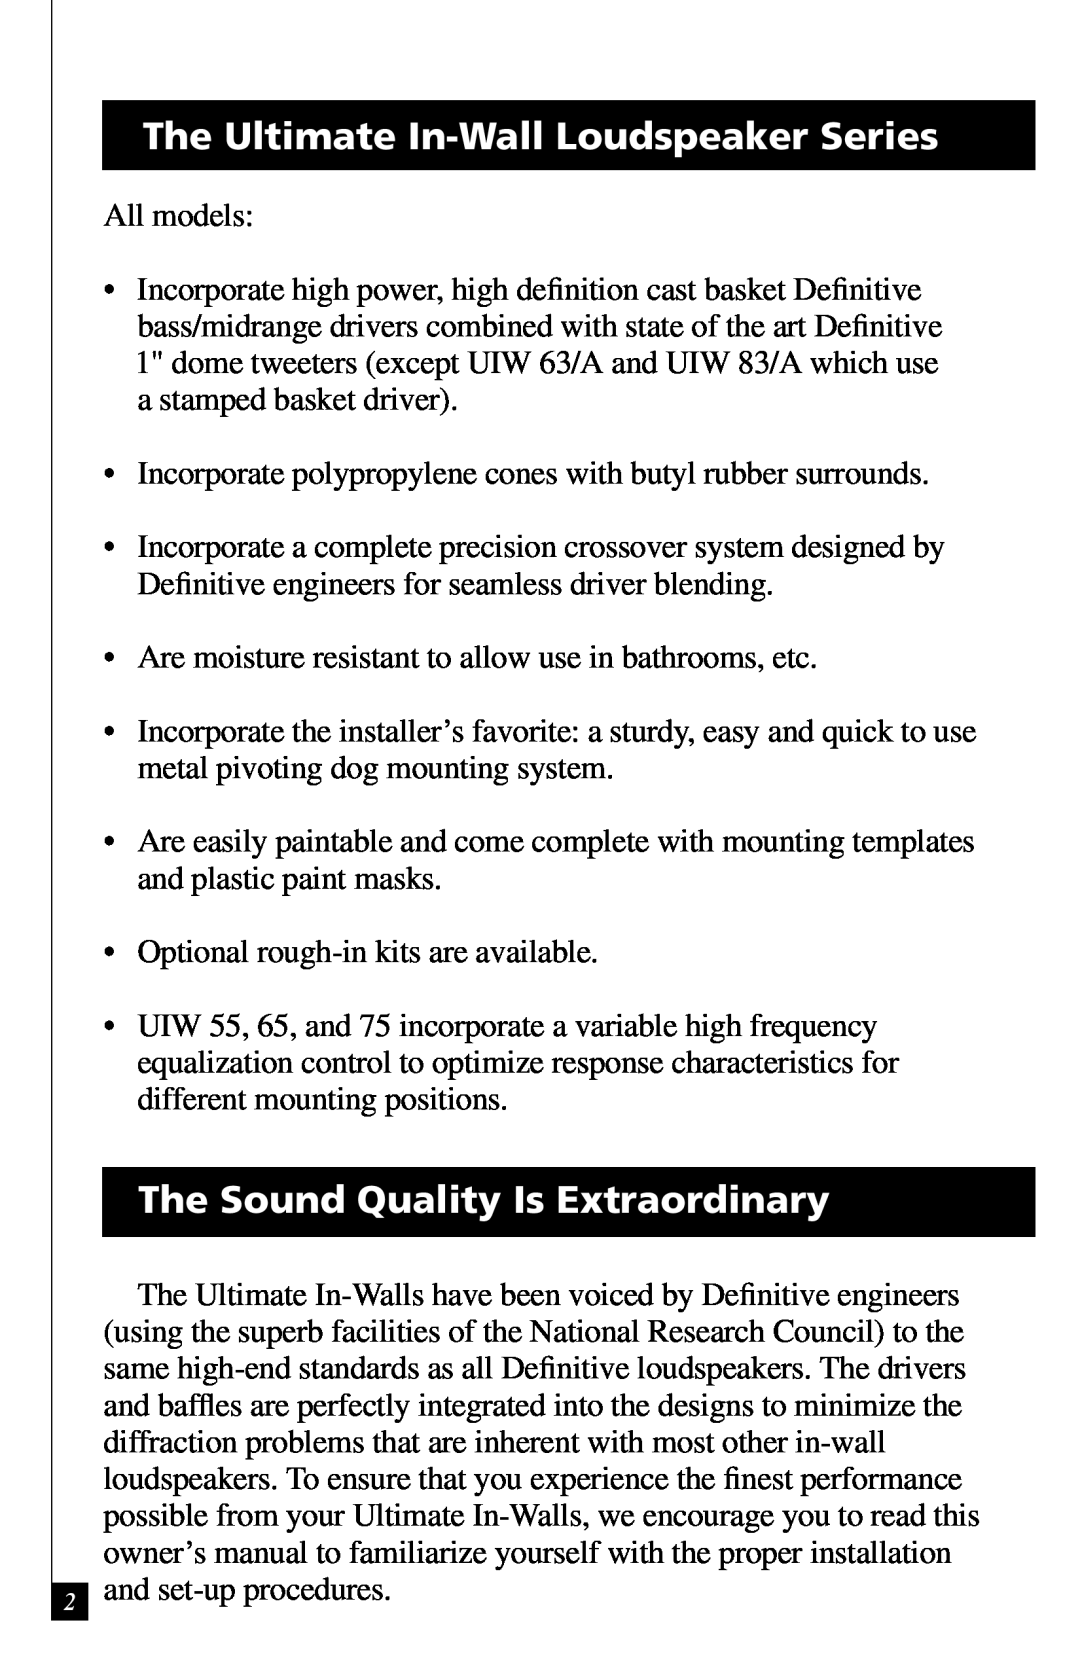 Definitive Technology UIW65, UIW55, UIW64A The Ultimate In-WallLoudspeaker Series, The Sound Quality Is Extraordinary 